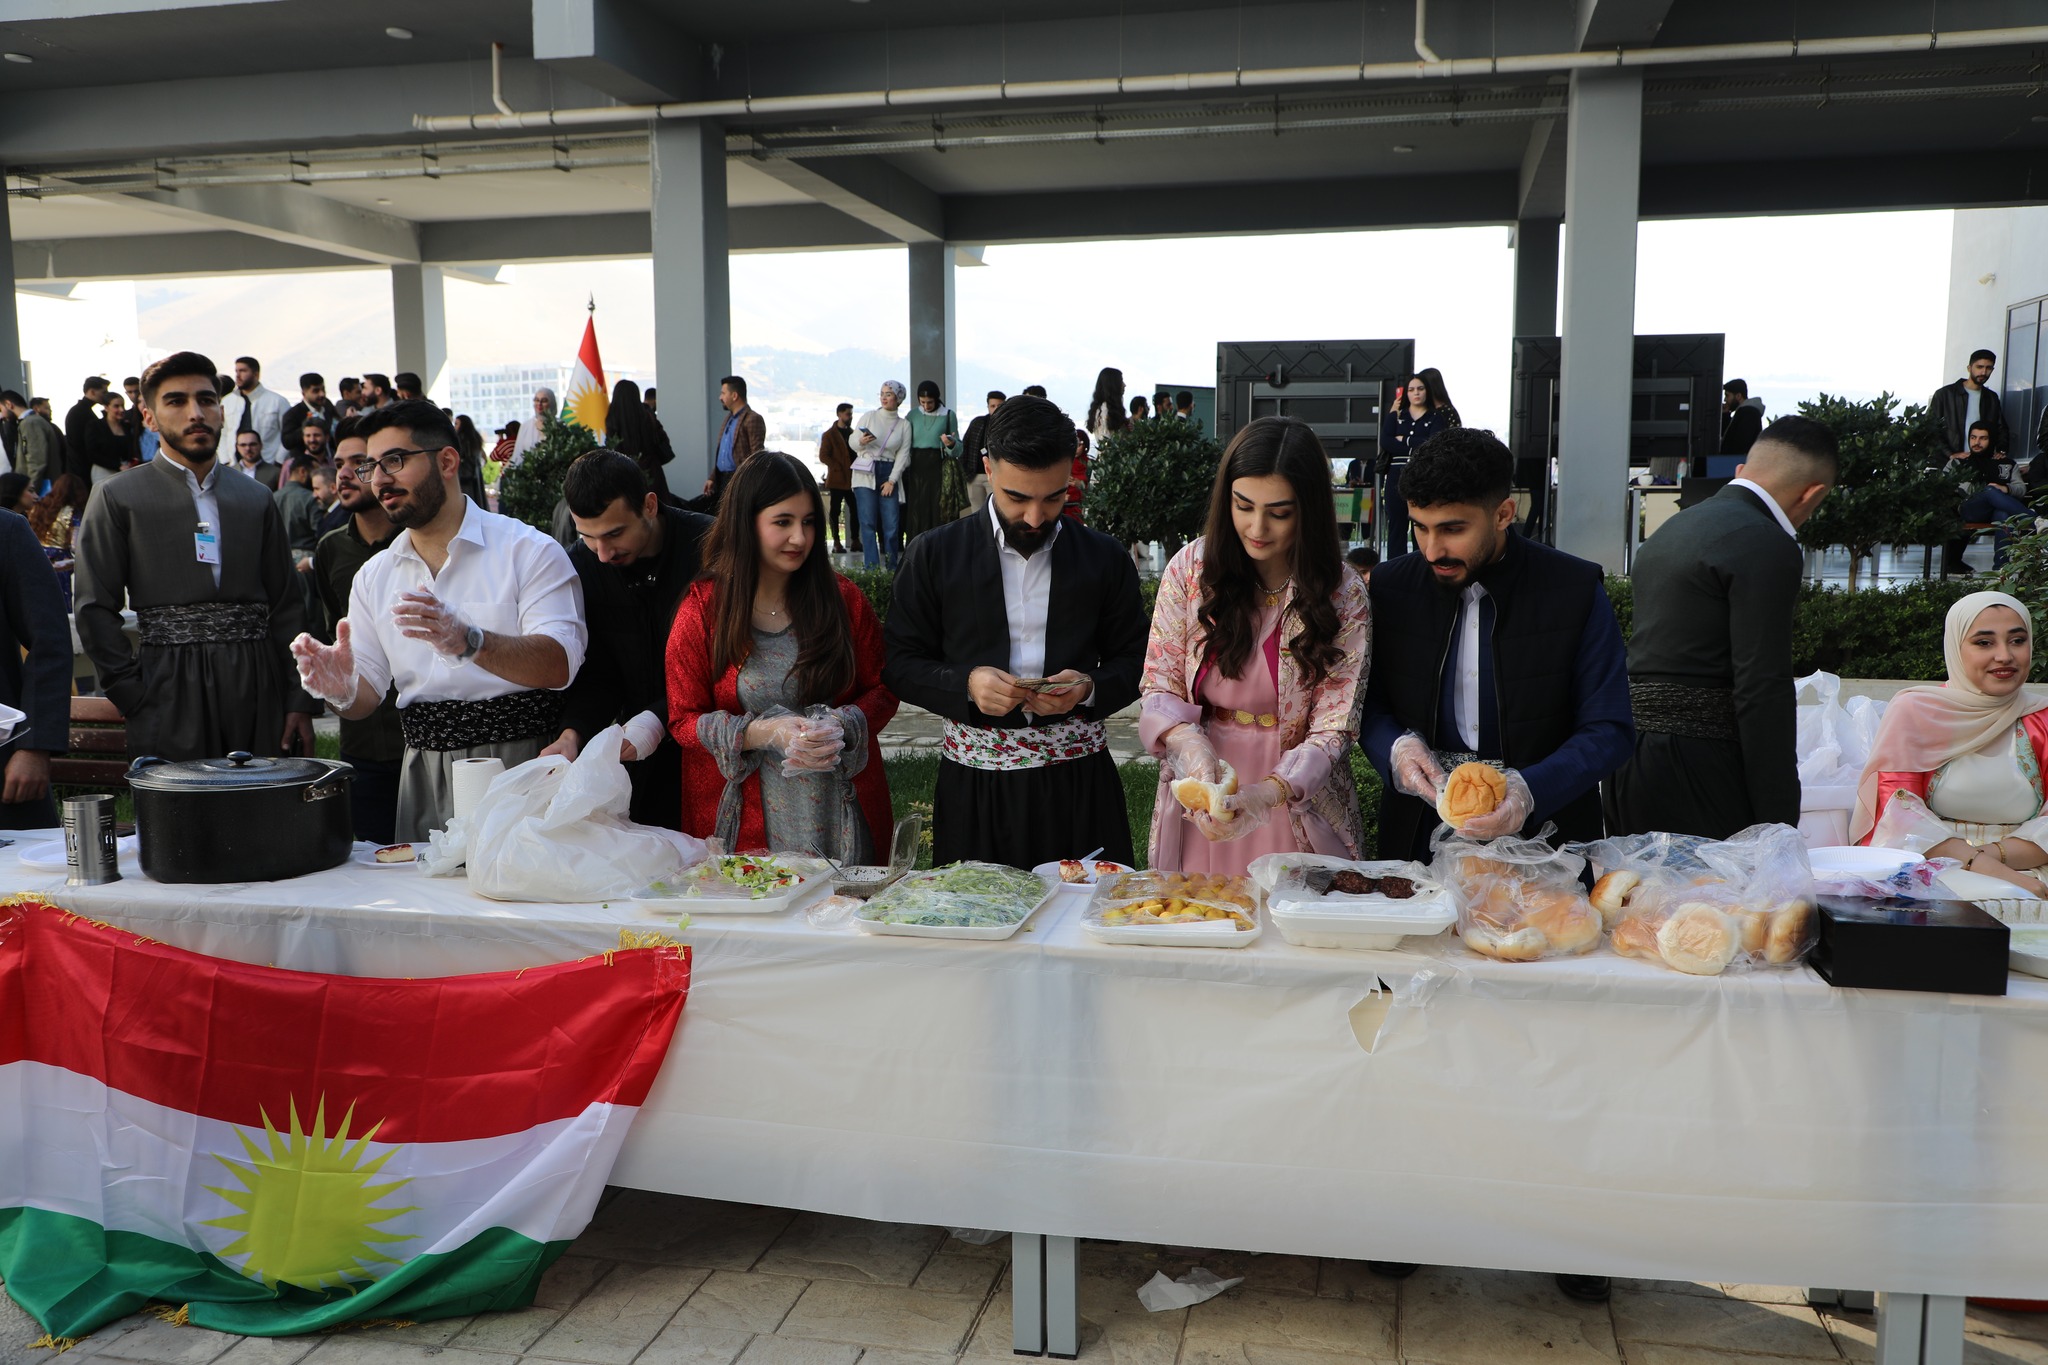 The Presidency of QIU along with its staff and students actively engaged in Charity event during the Kurdish Flag Day Festival